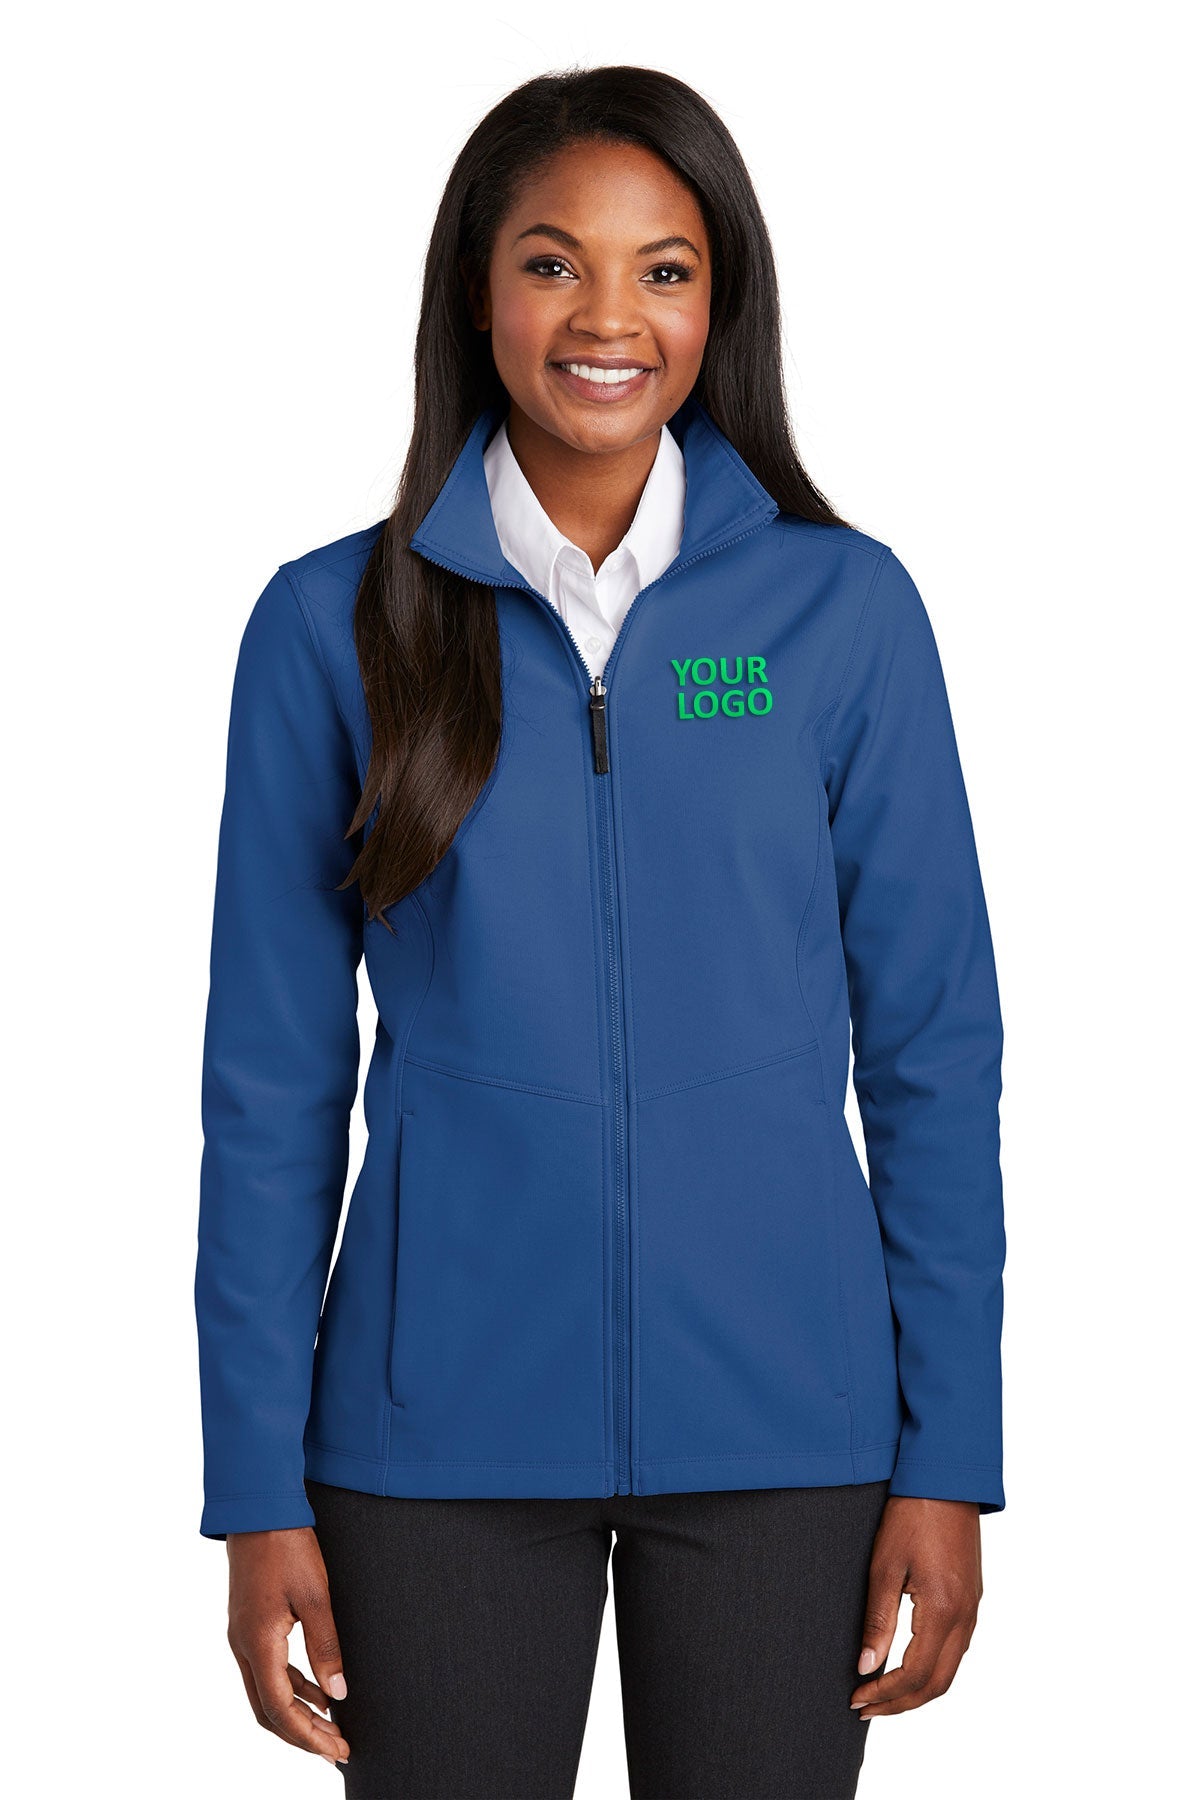 Port Authority Night Sky Blue L901 company embroidered jackets